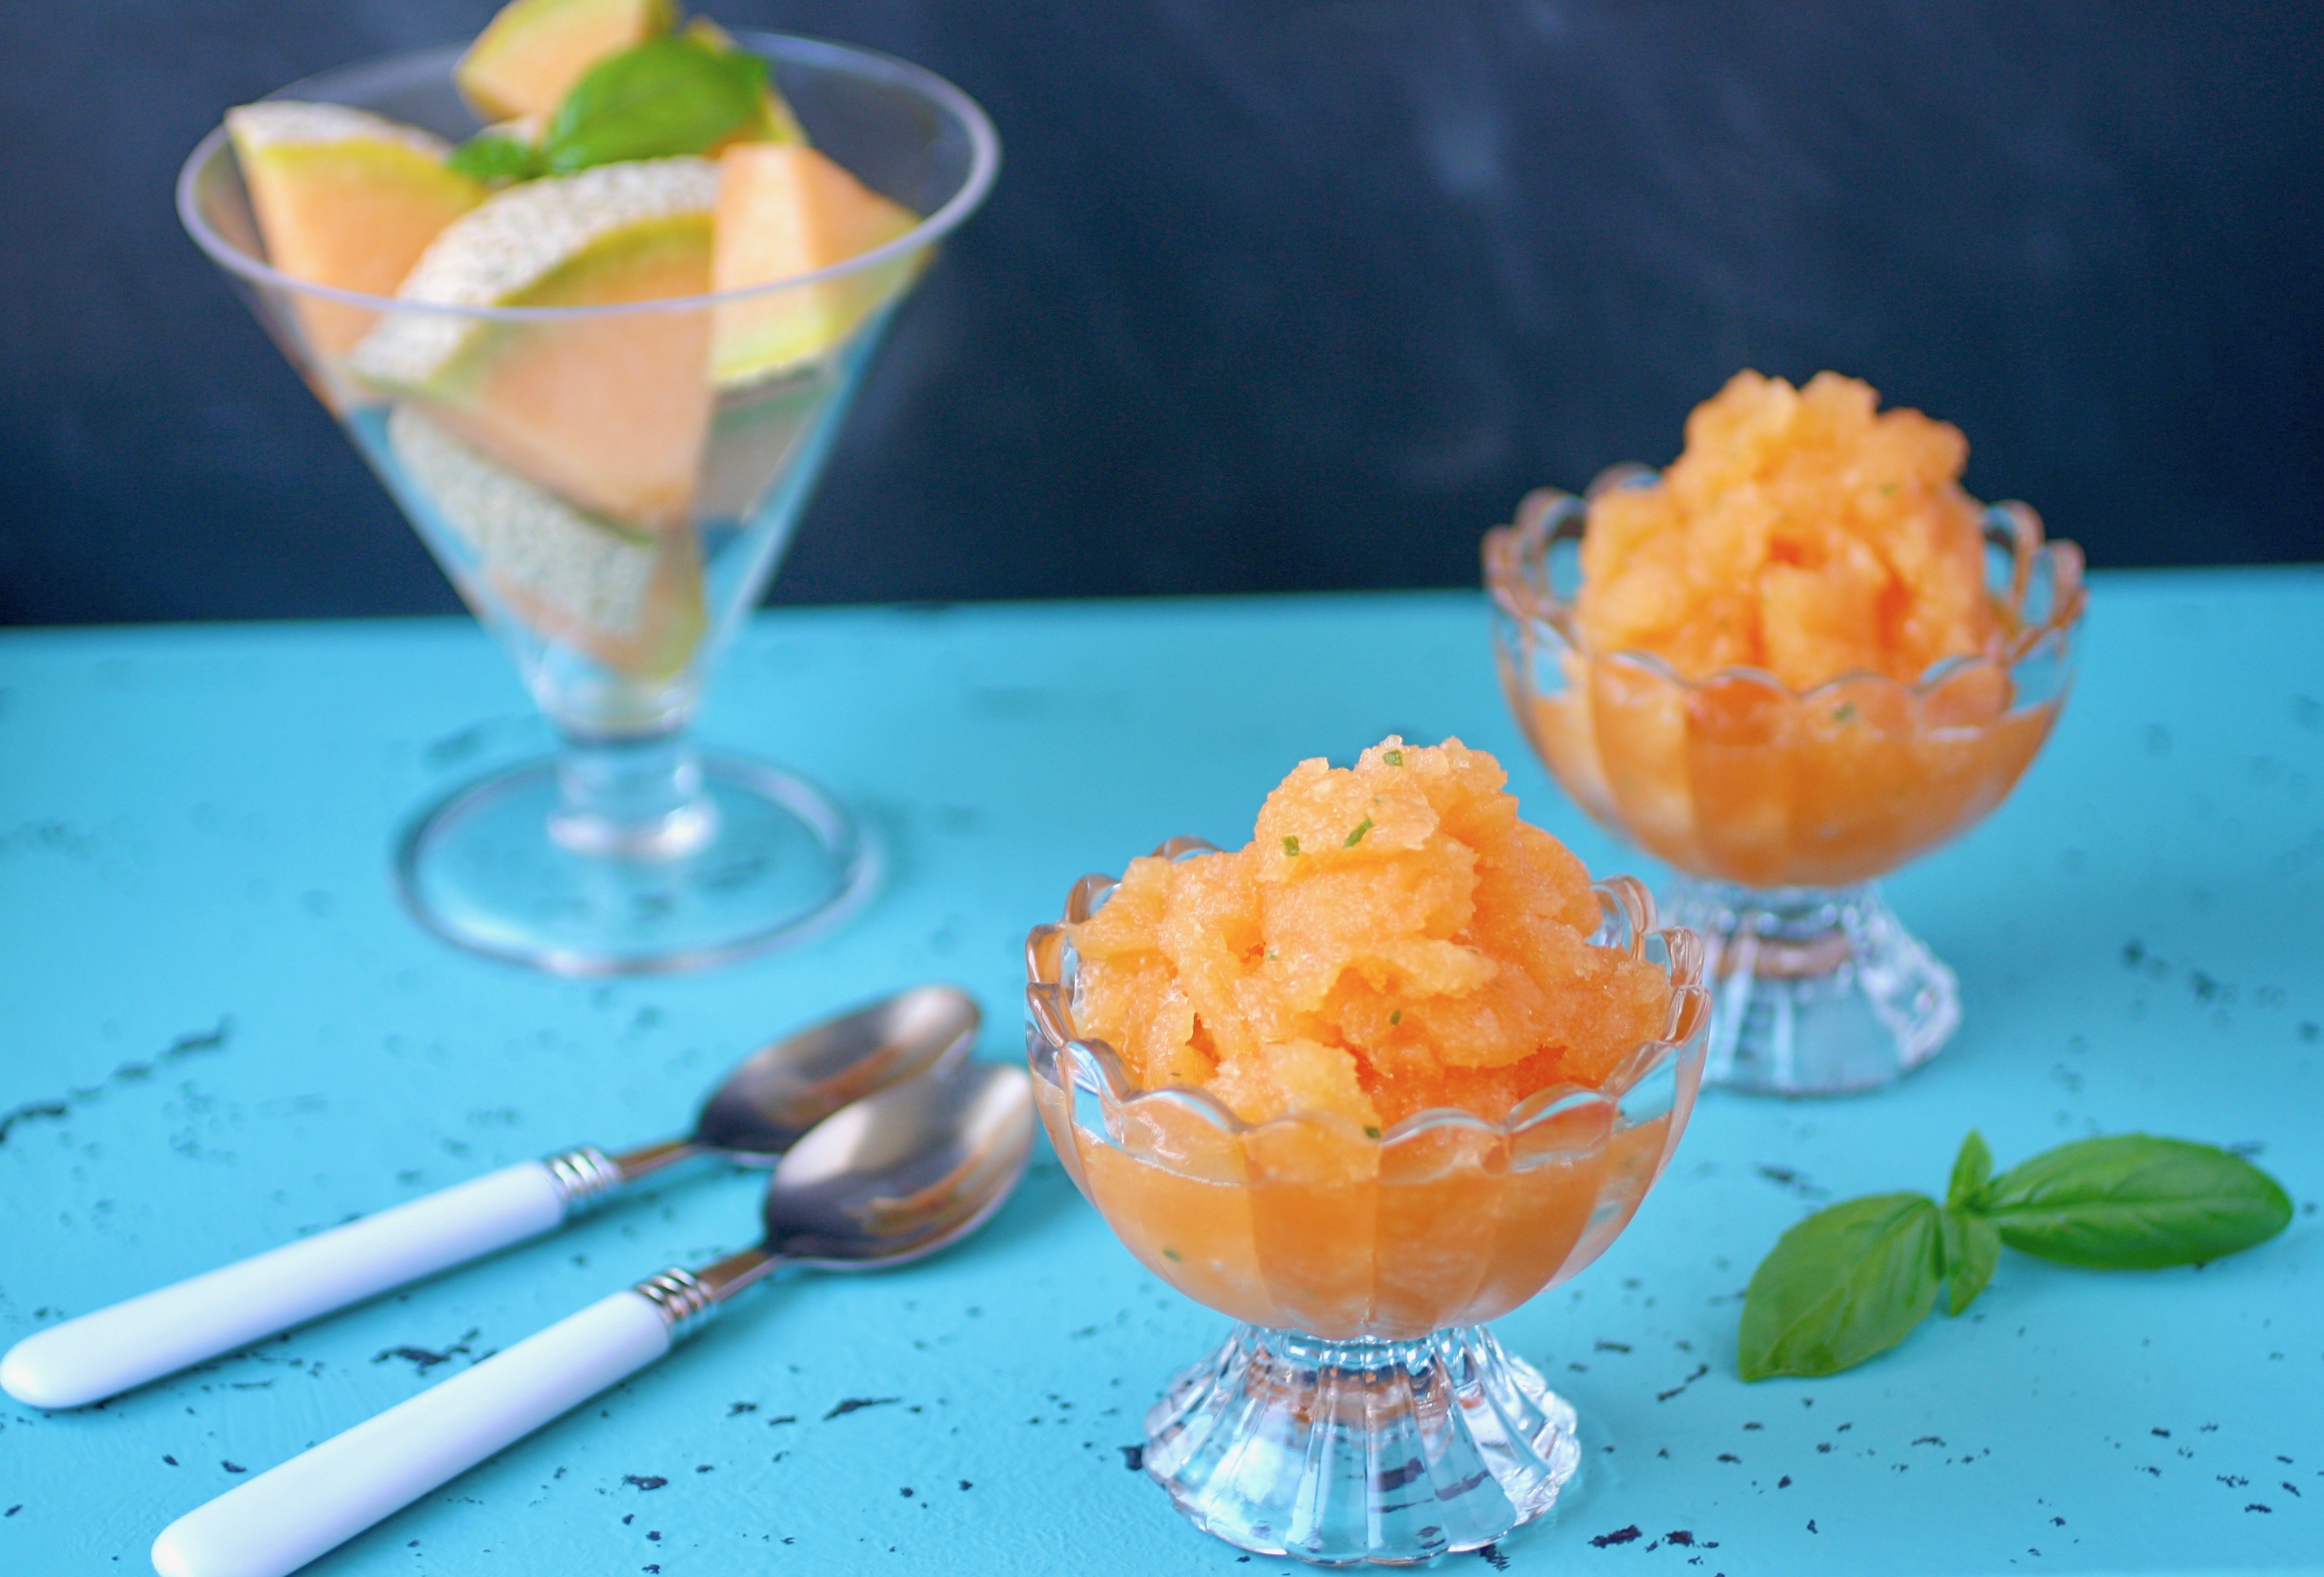 Cantaloupe-Basil Granita is frosty and refreshing for a summer treat. Cantaloupe-Basil Granita is perfect for your next summer gathering.